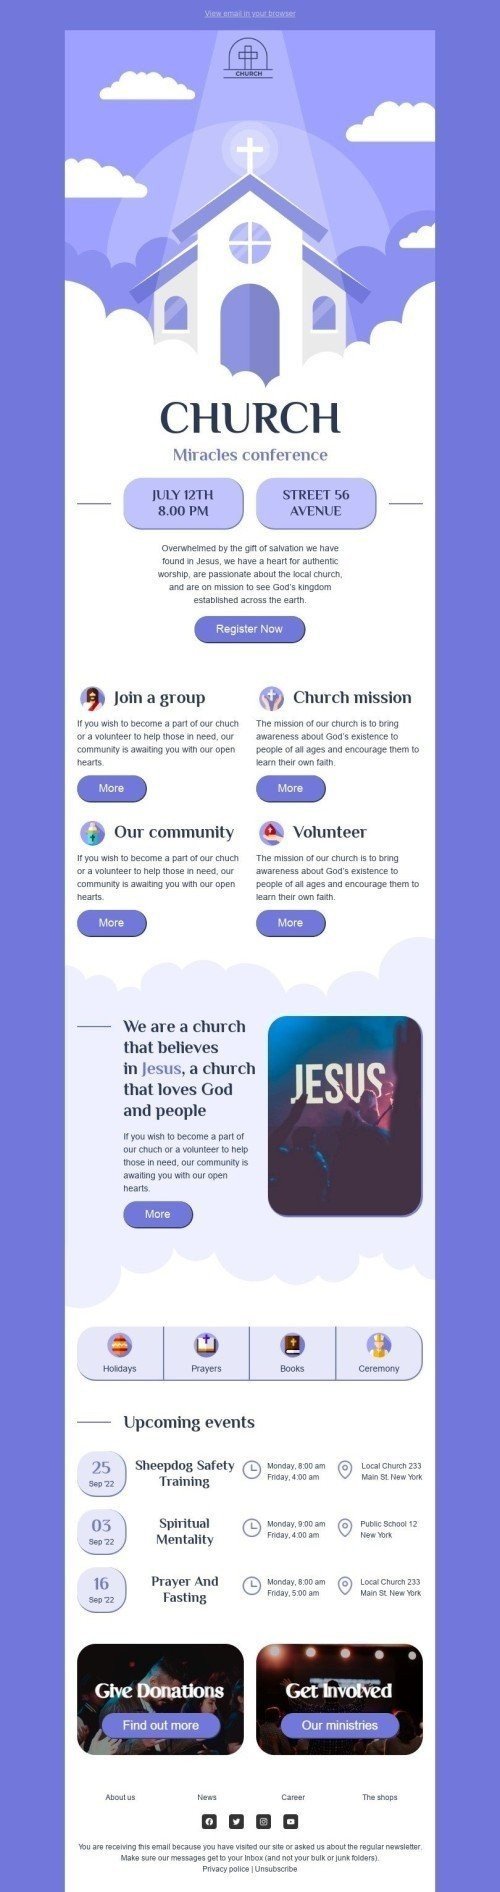 Promo Email Template "Miracles conference" for Church industry mobile view